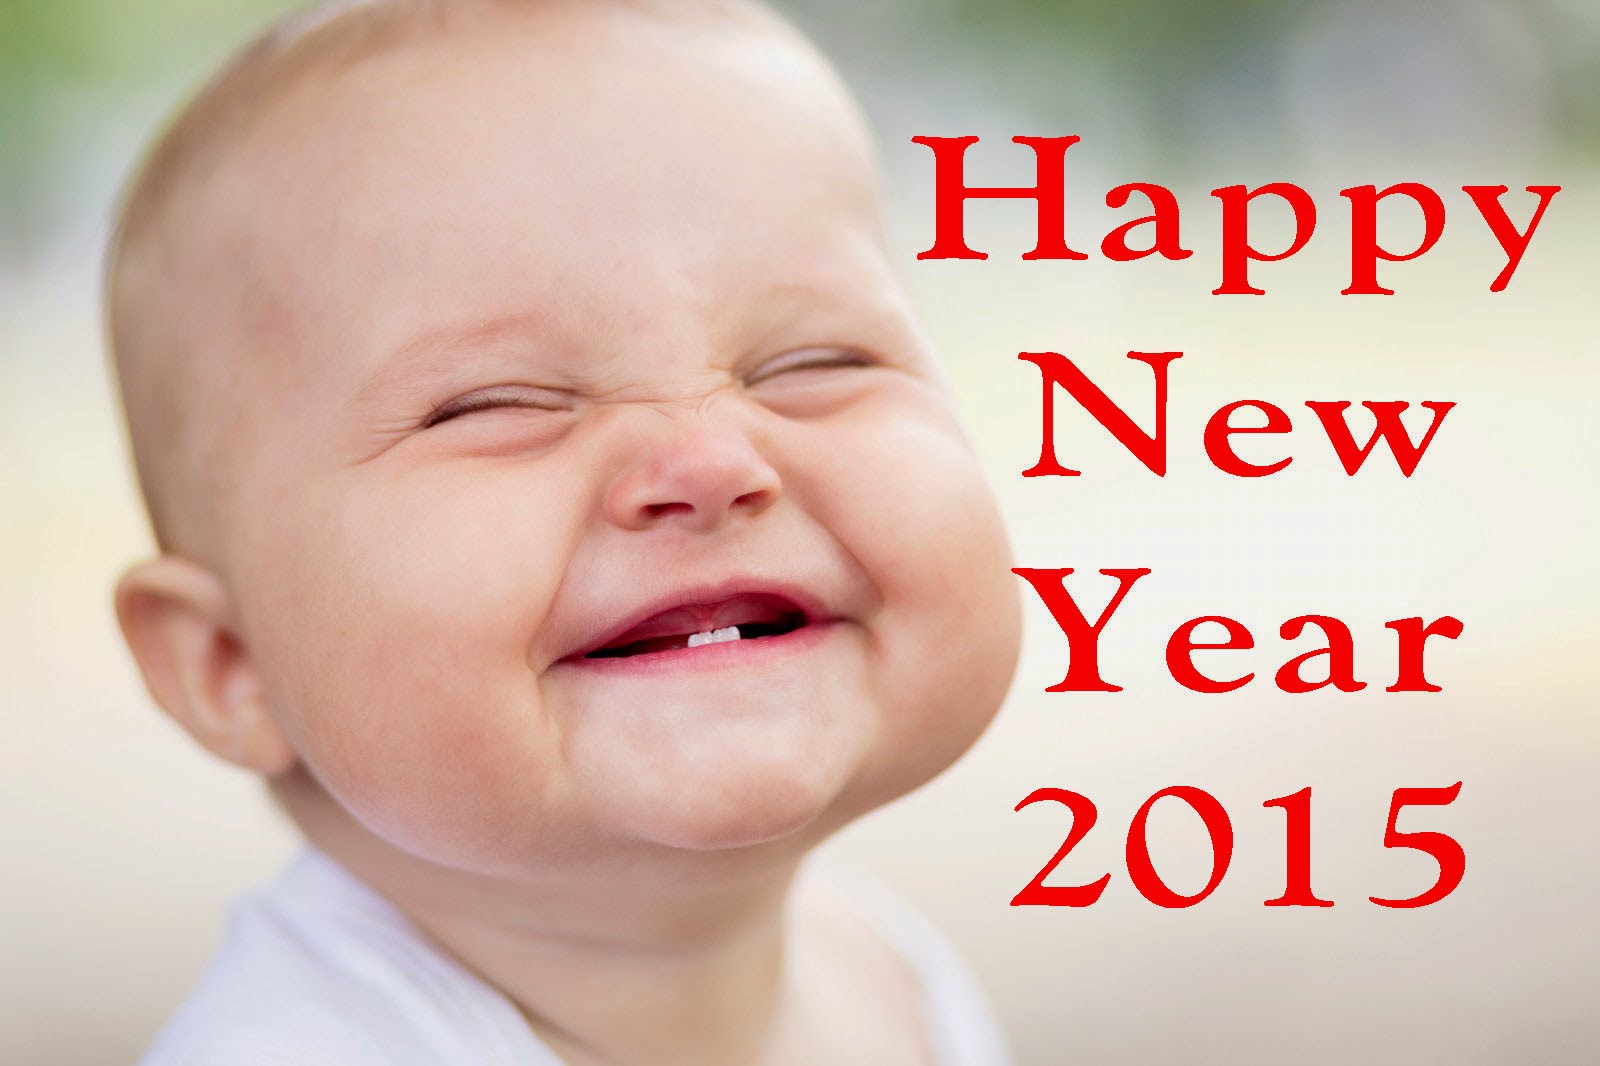 Photo for funny baby new year pics